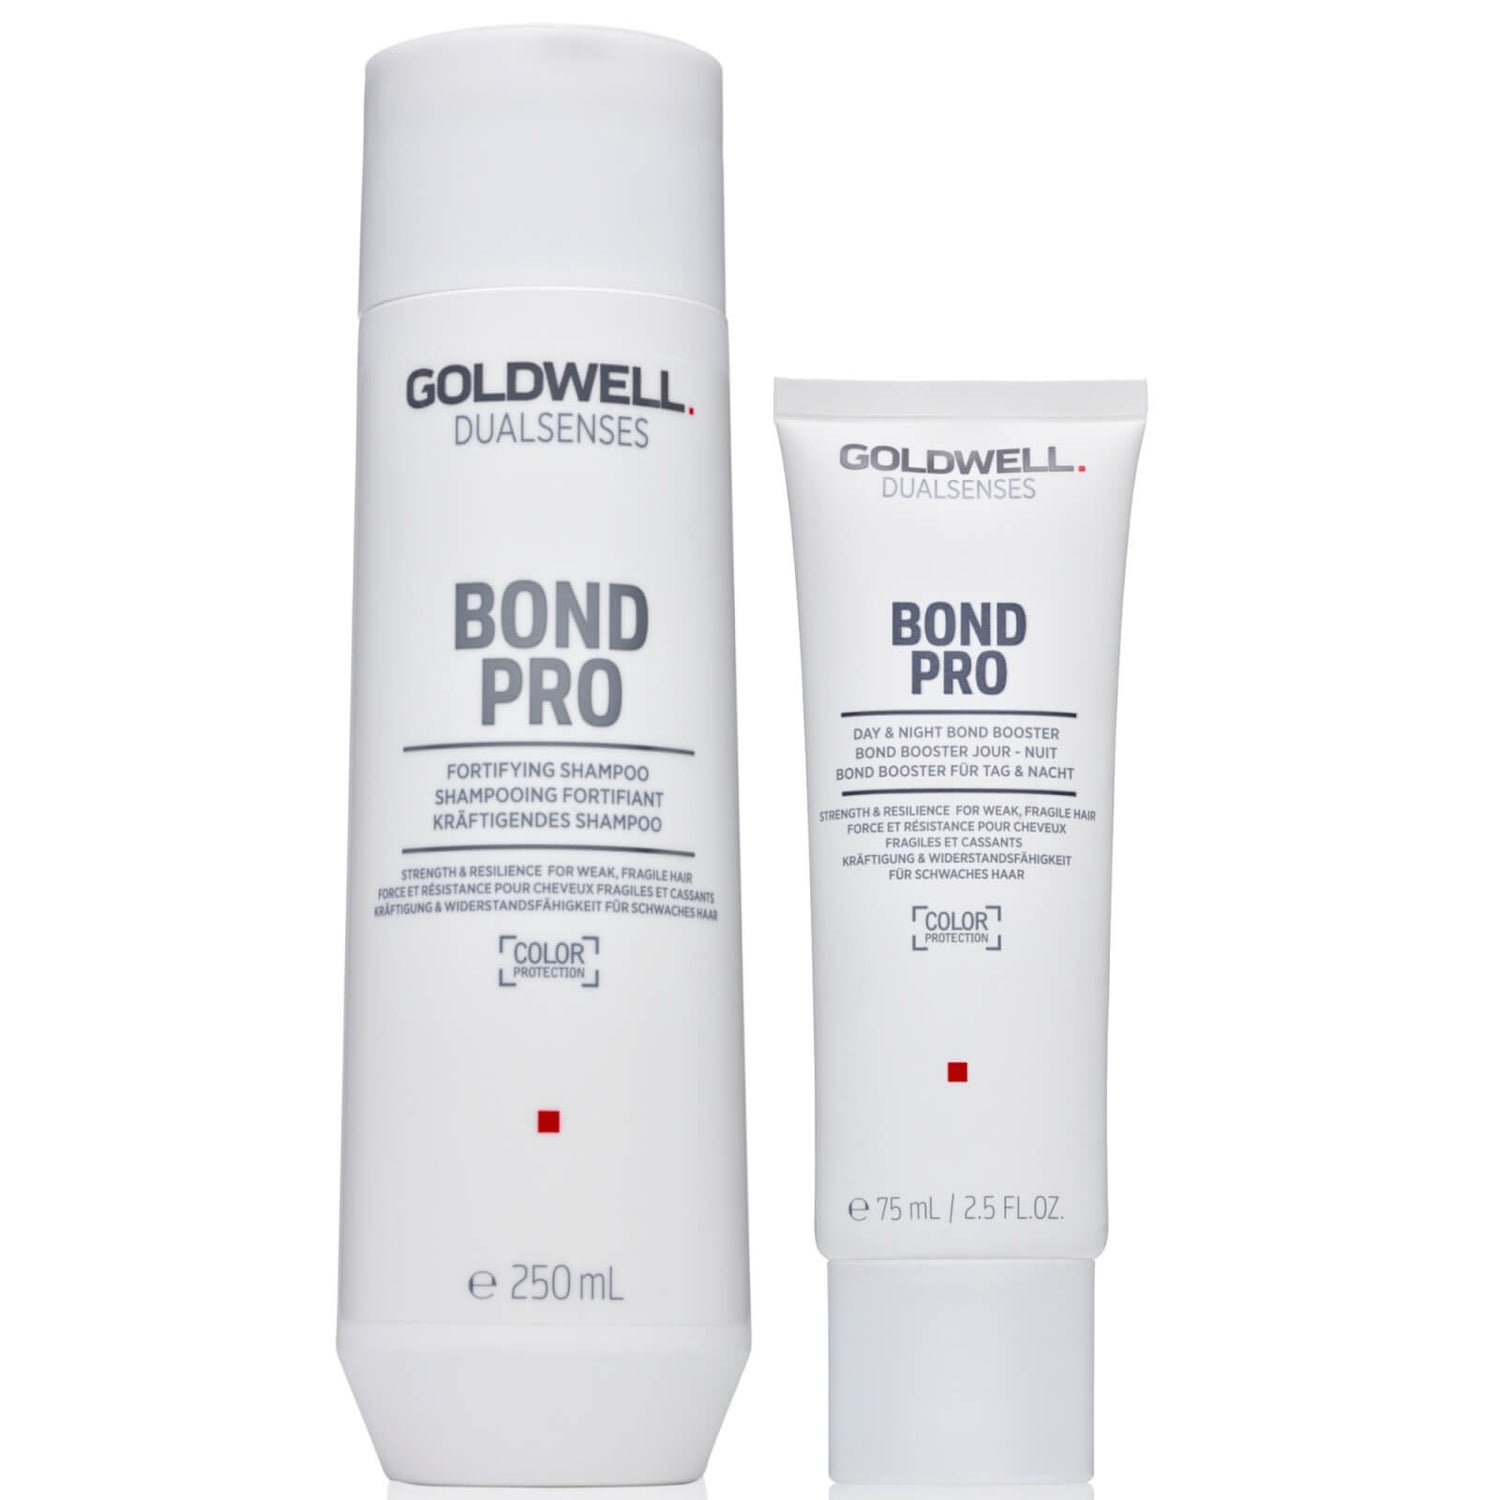 Goldwell Dualsenses Bond Pro Day and Night Bond Booster Duo For Weak, Damaged Hair (Worth £33.55)